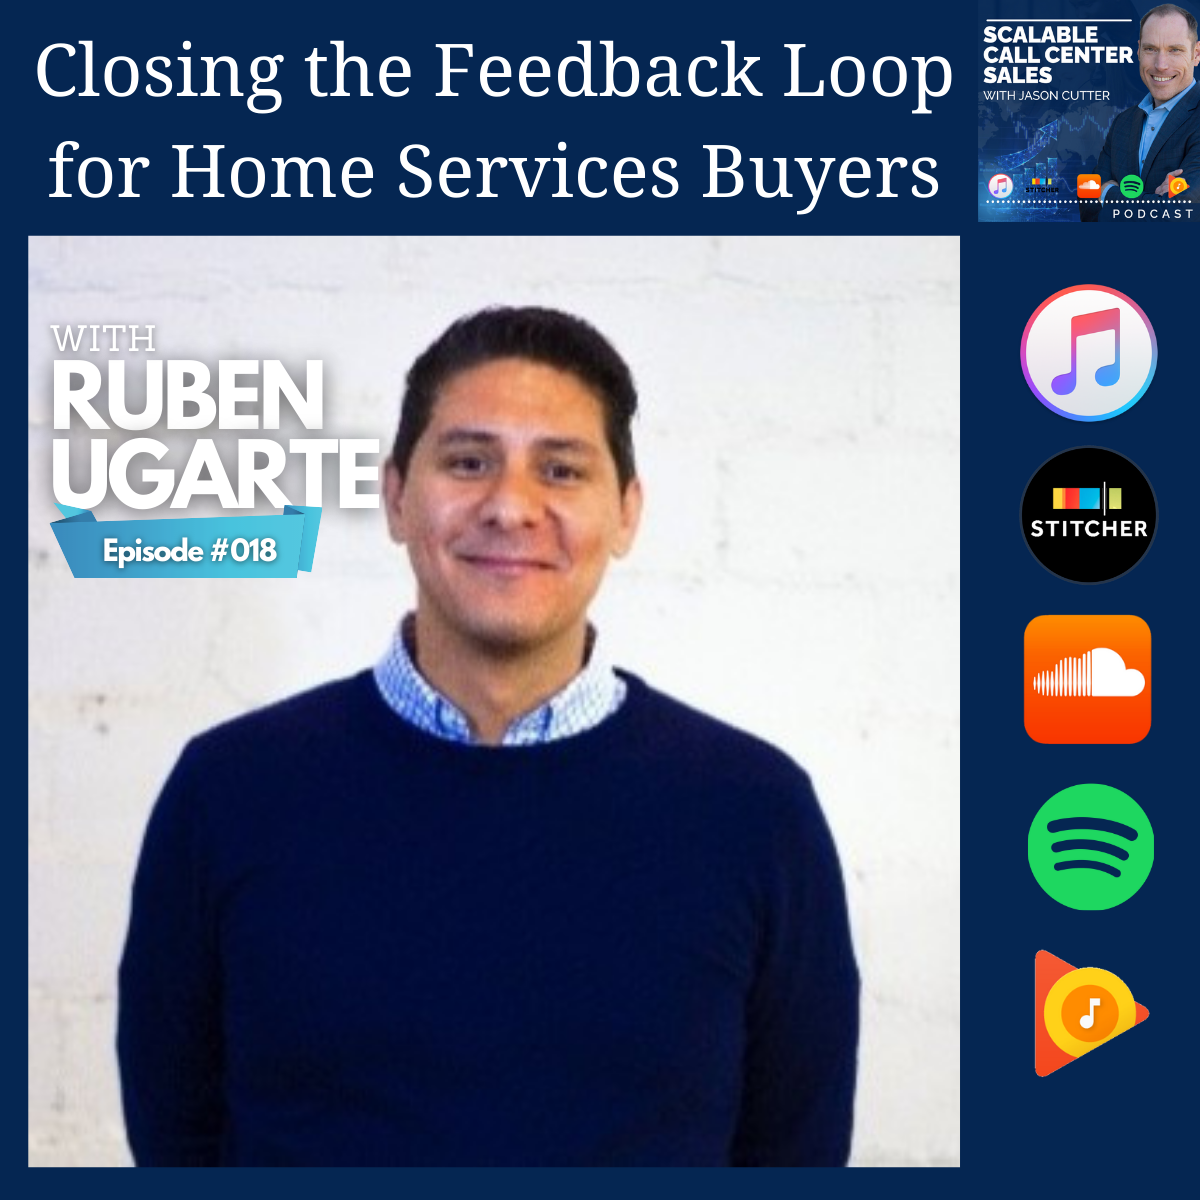 [018] Closing the Feedback Loop for Home Services Buyers, with Ruben Ugarte from Active Prospect